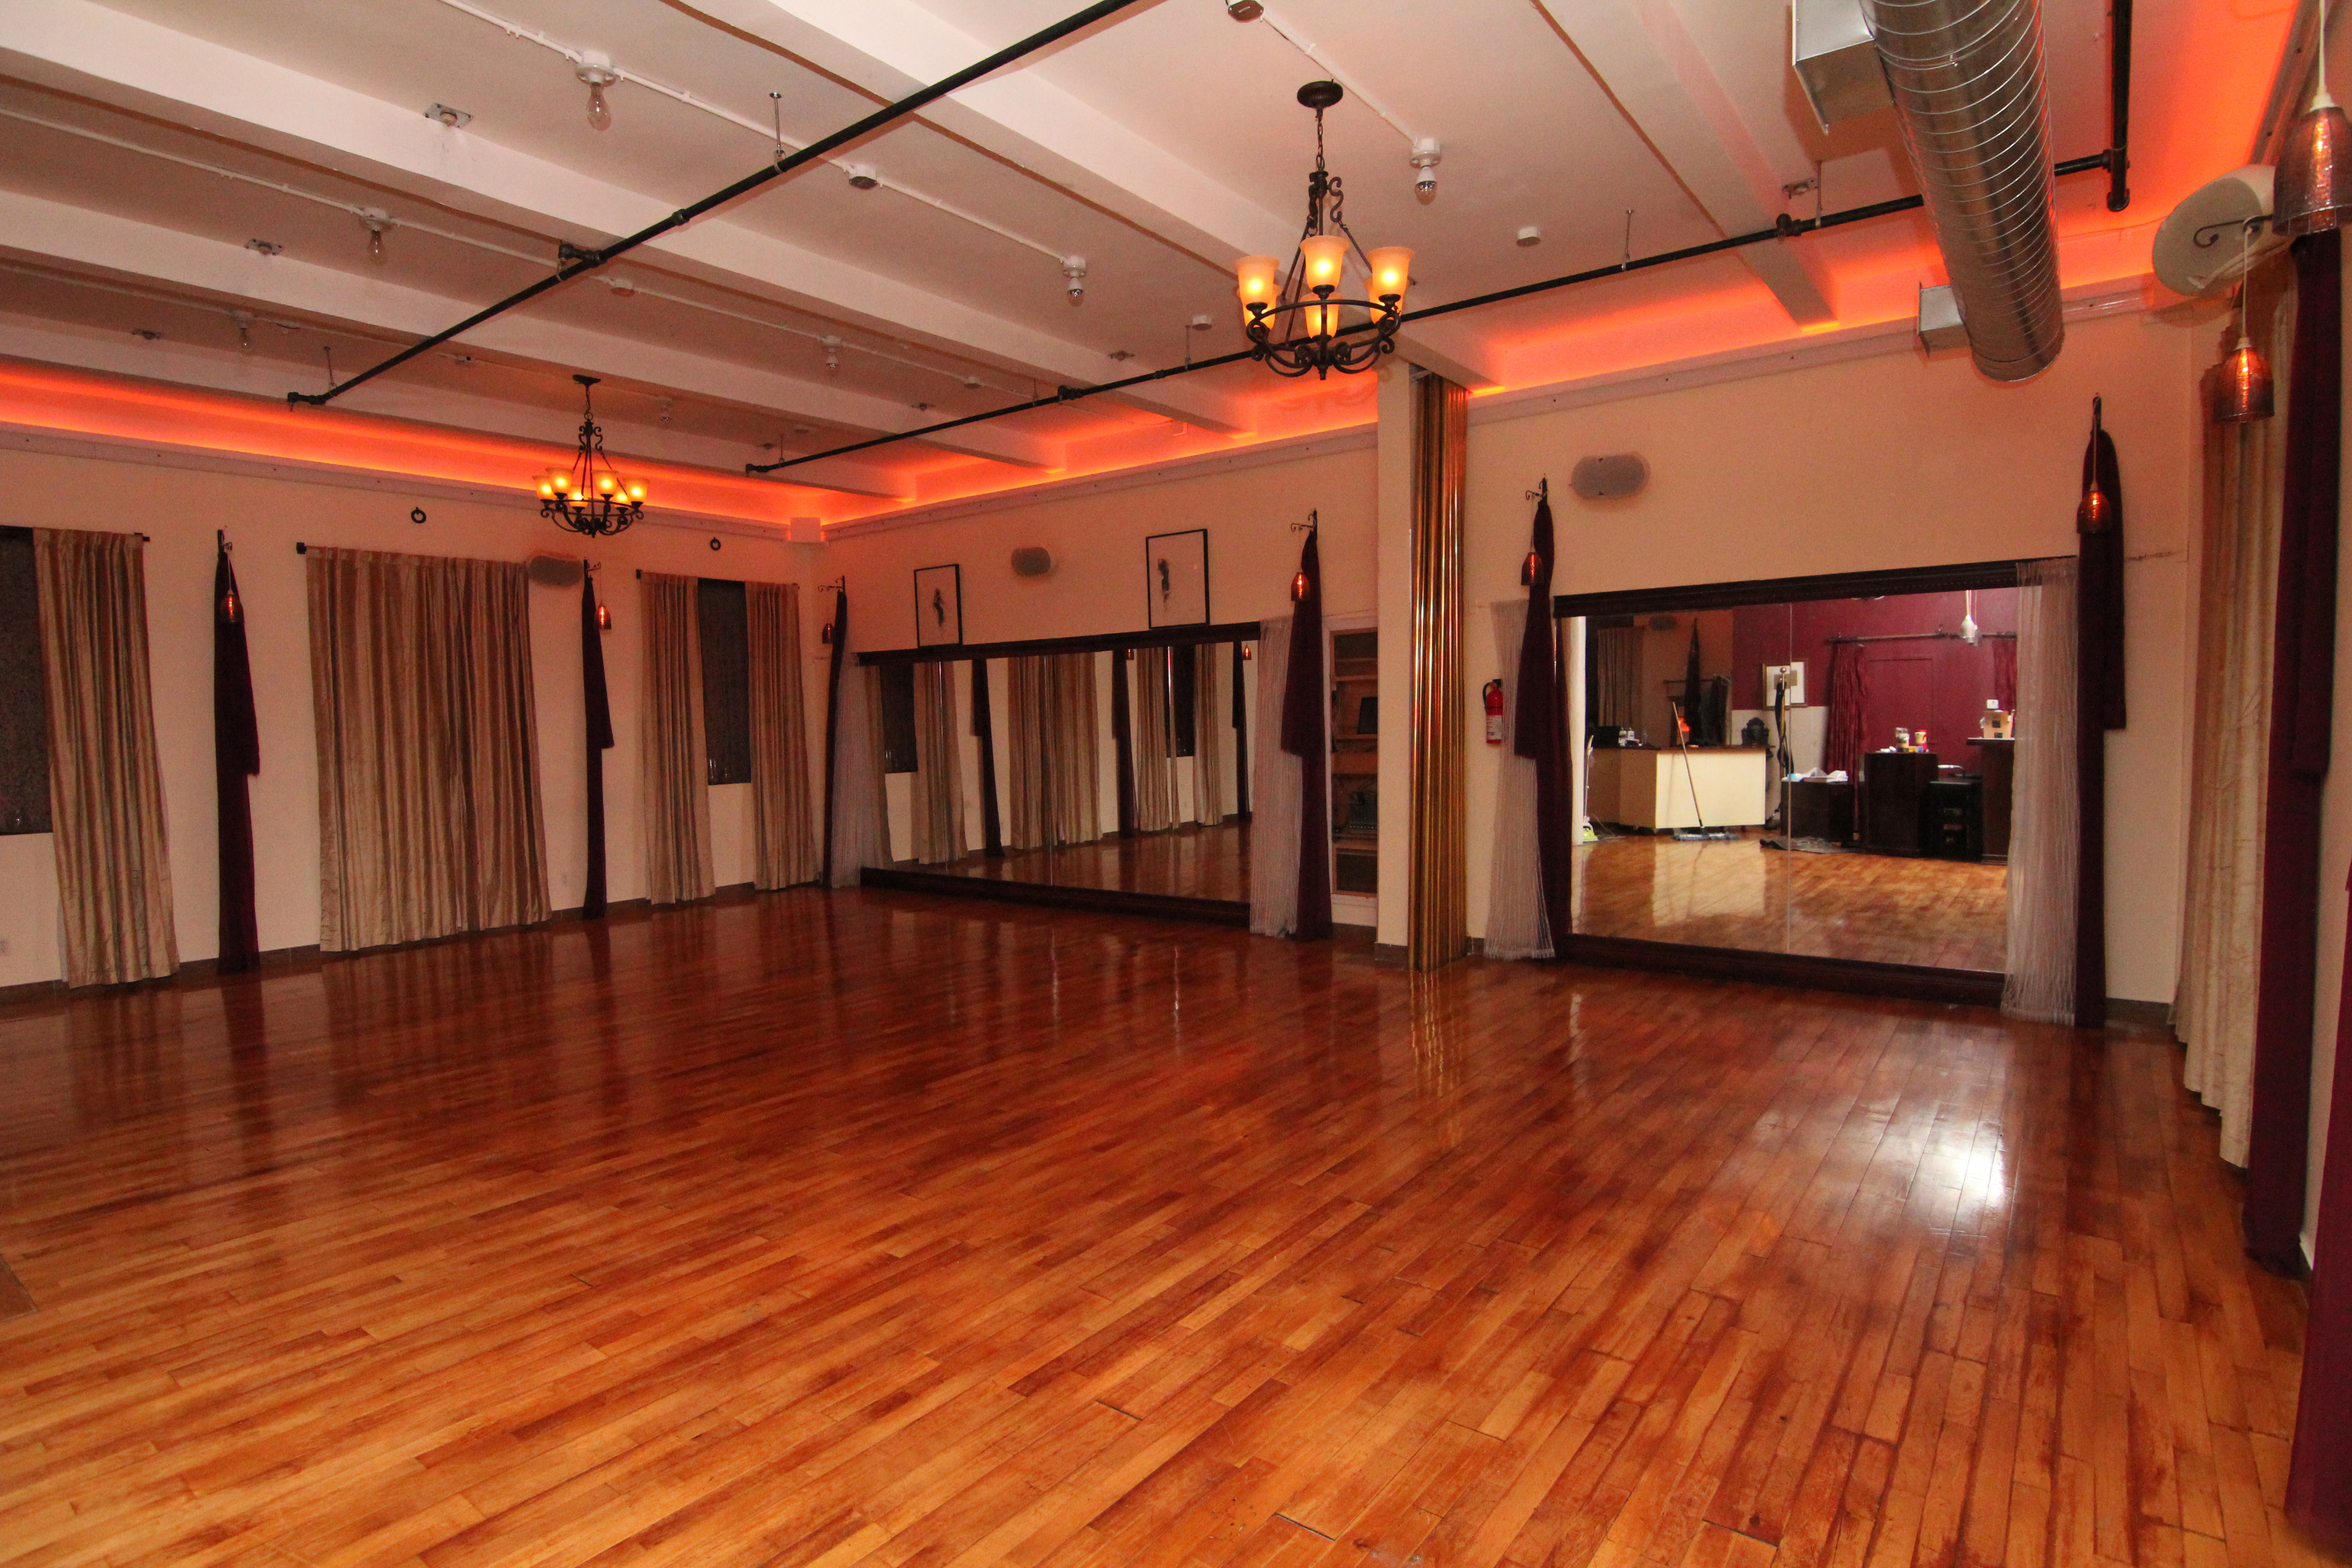 Best of NY Venue for Private Parties